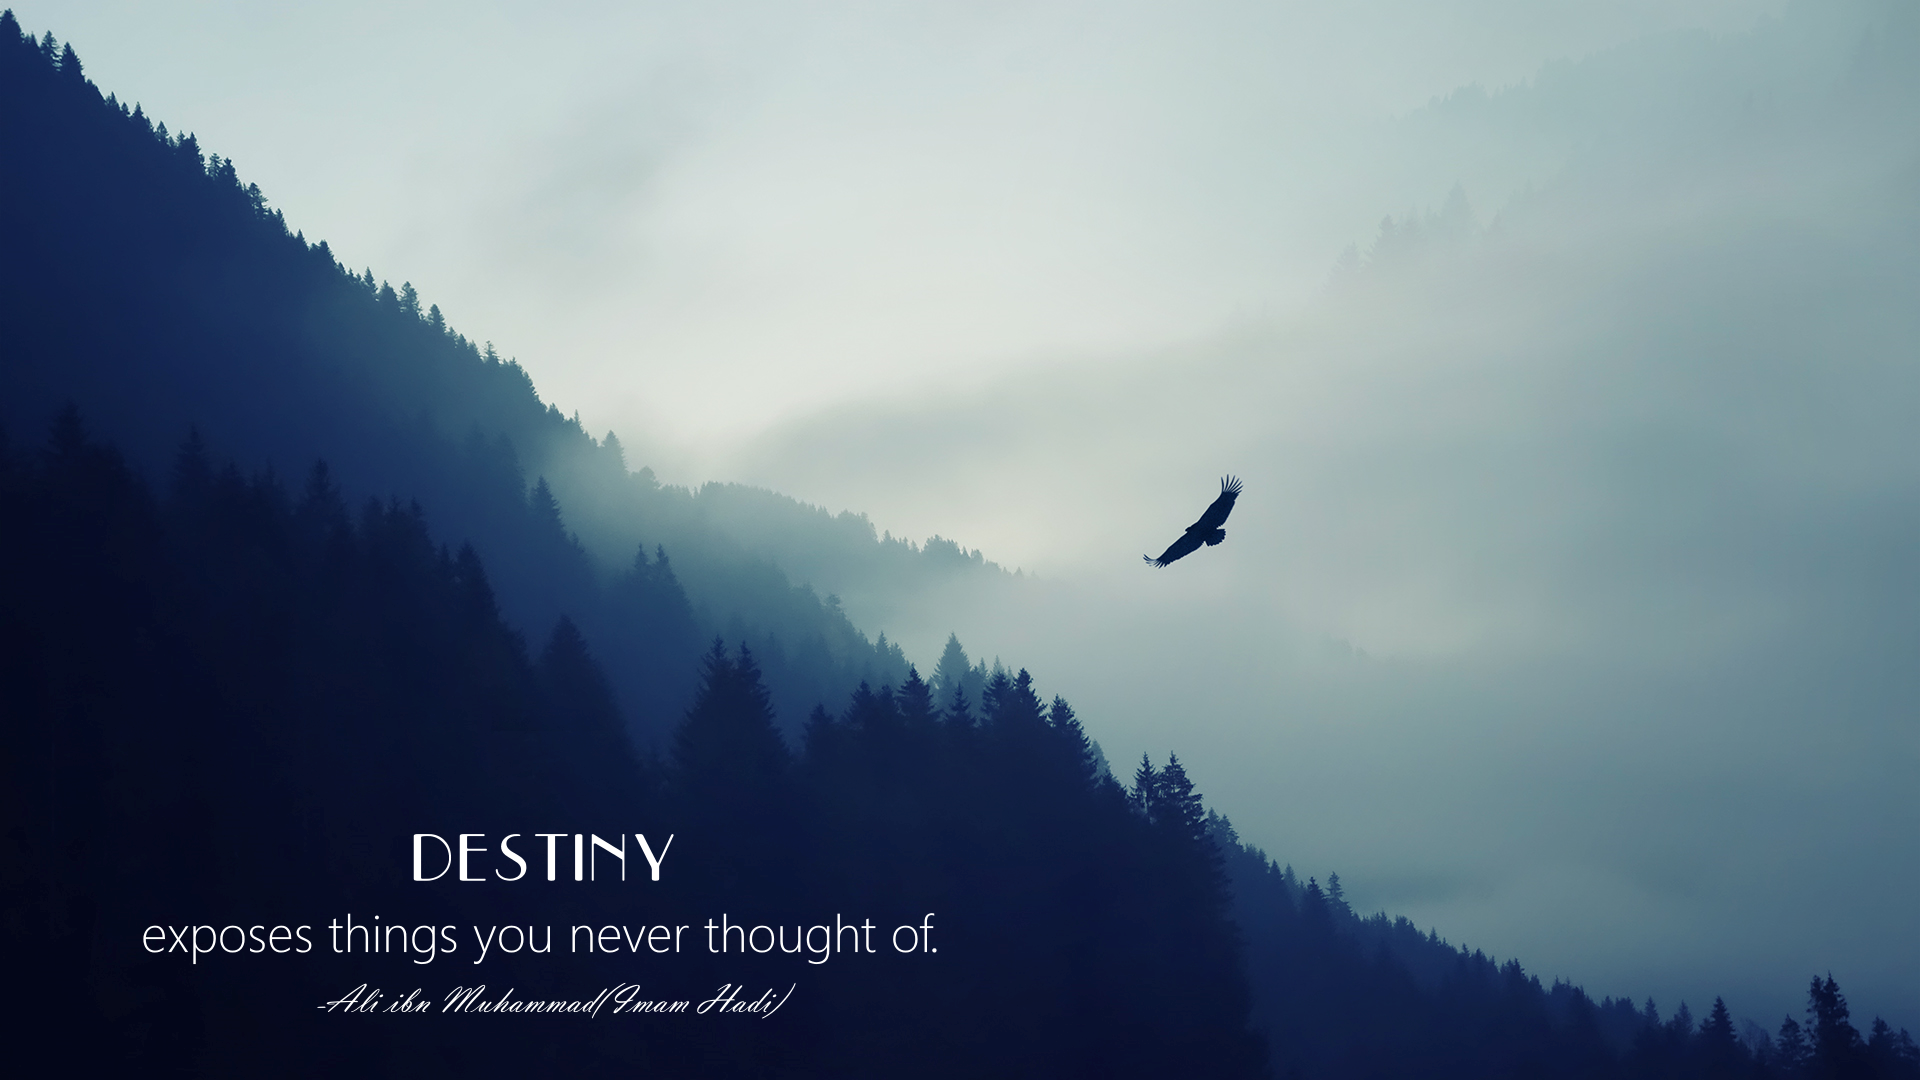 Imam Islam Quote Eagle Forest Clouds Mist 1920x1080